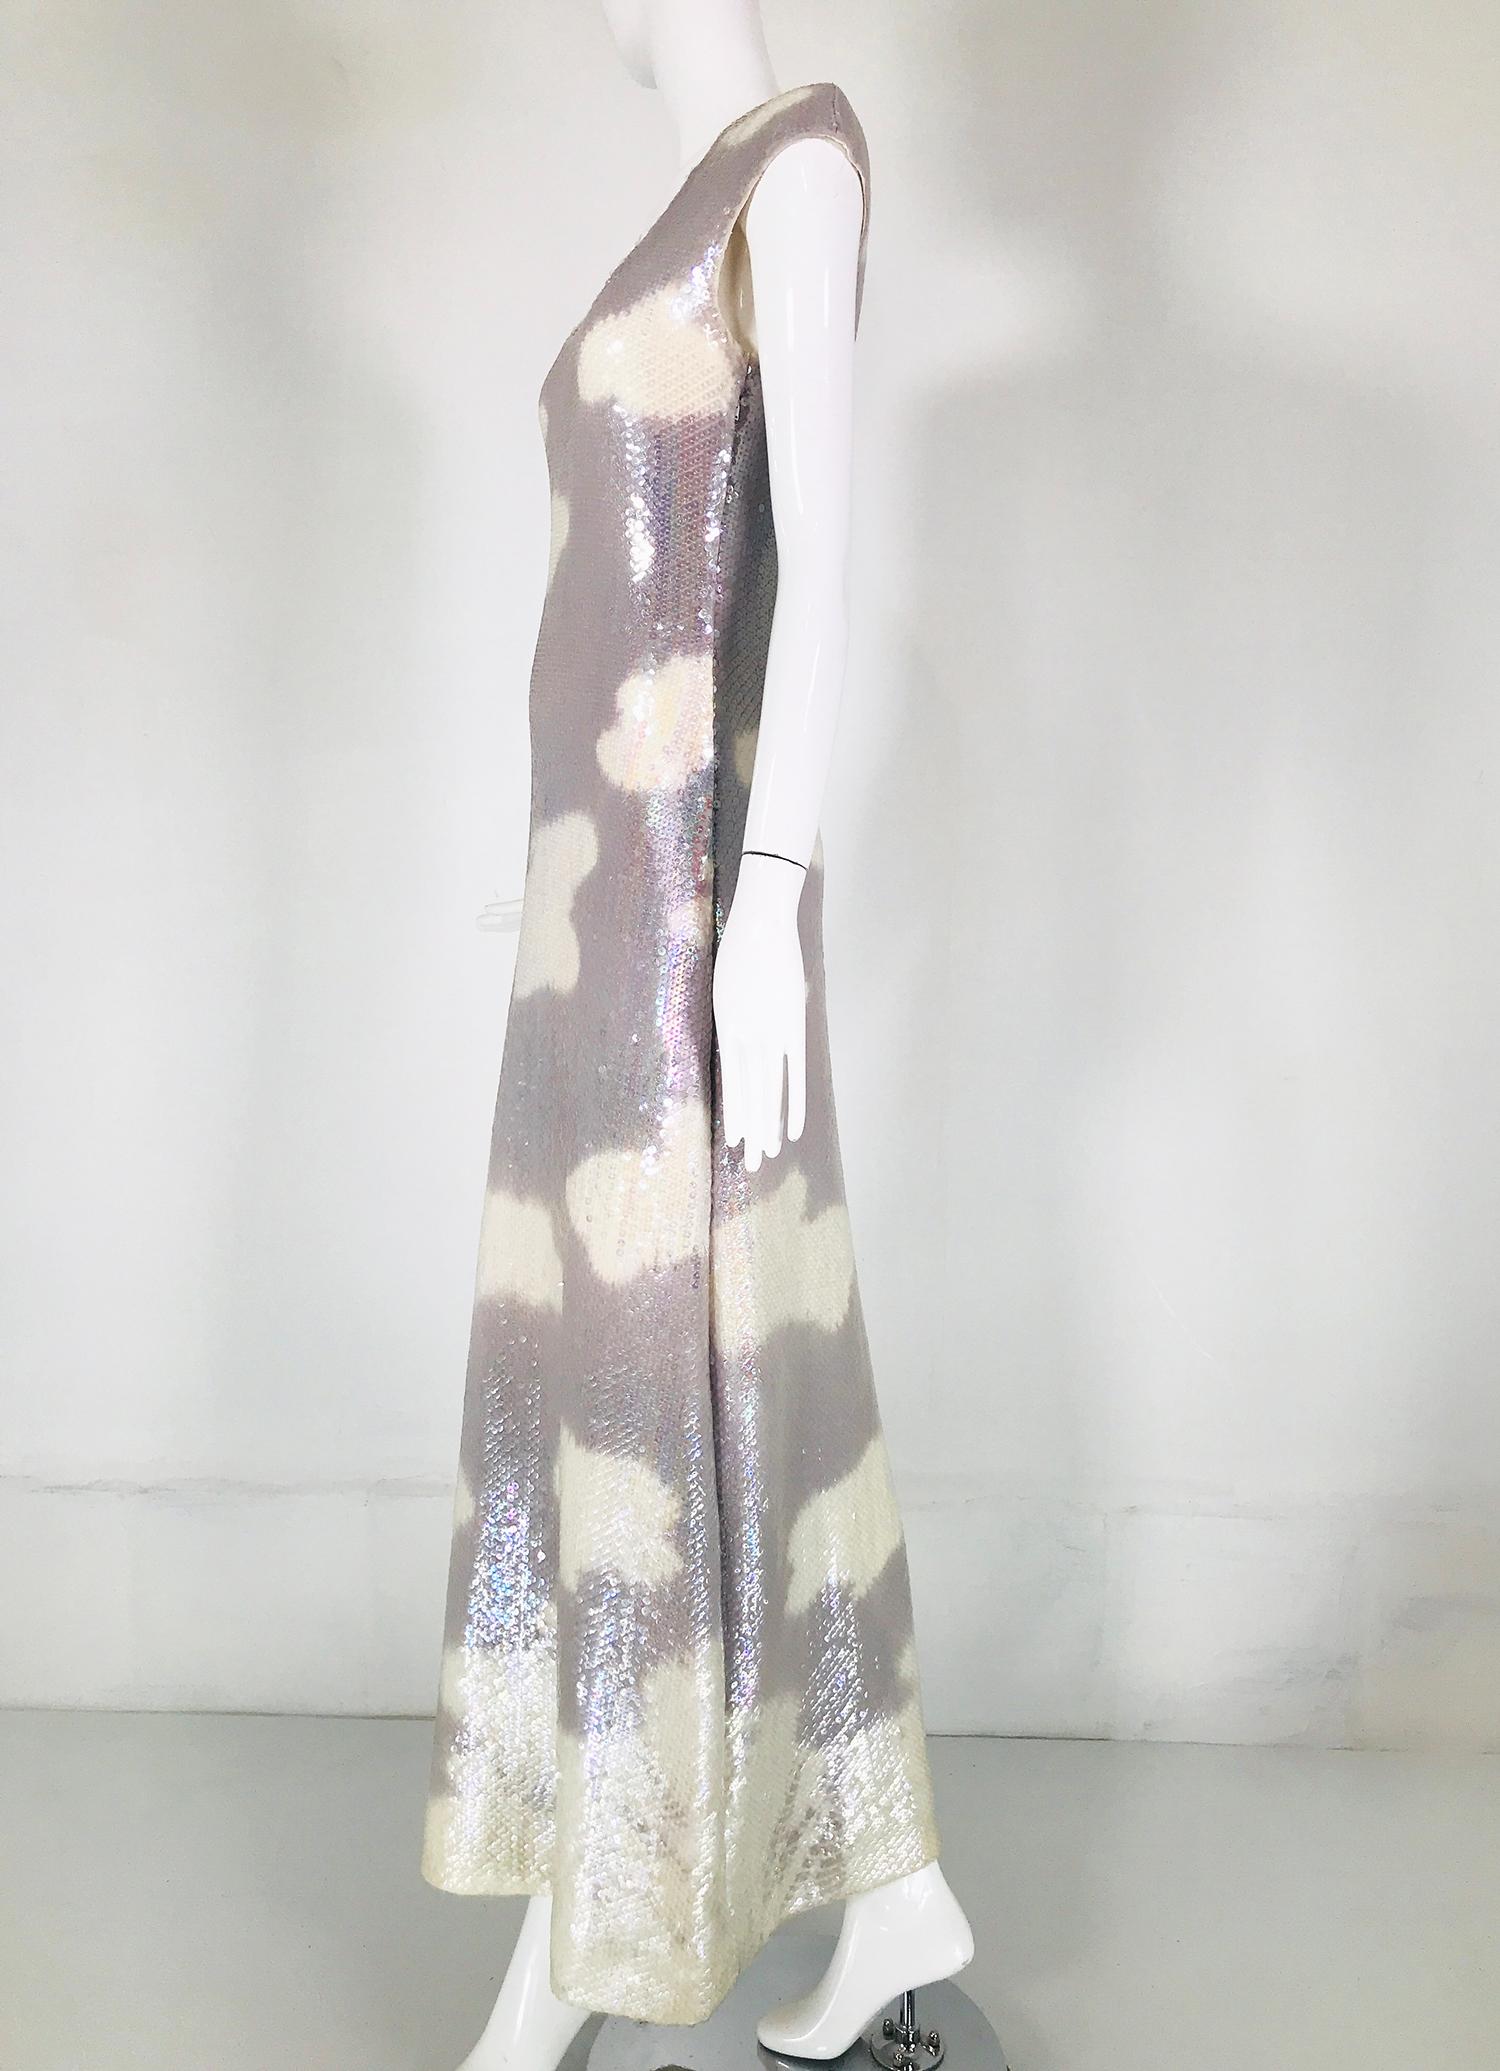 Halston Iconic Clouds Dress in Stormy Grey & Cream Iridescent Sequins Mid 1970s 7